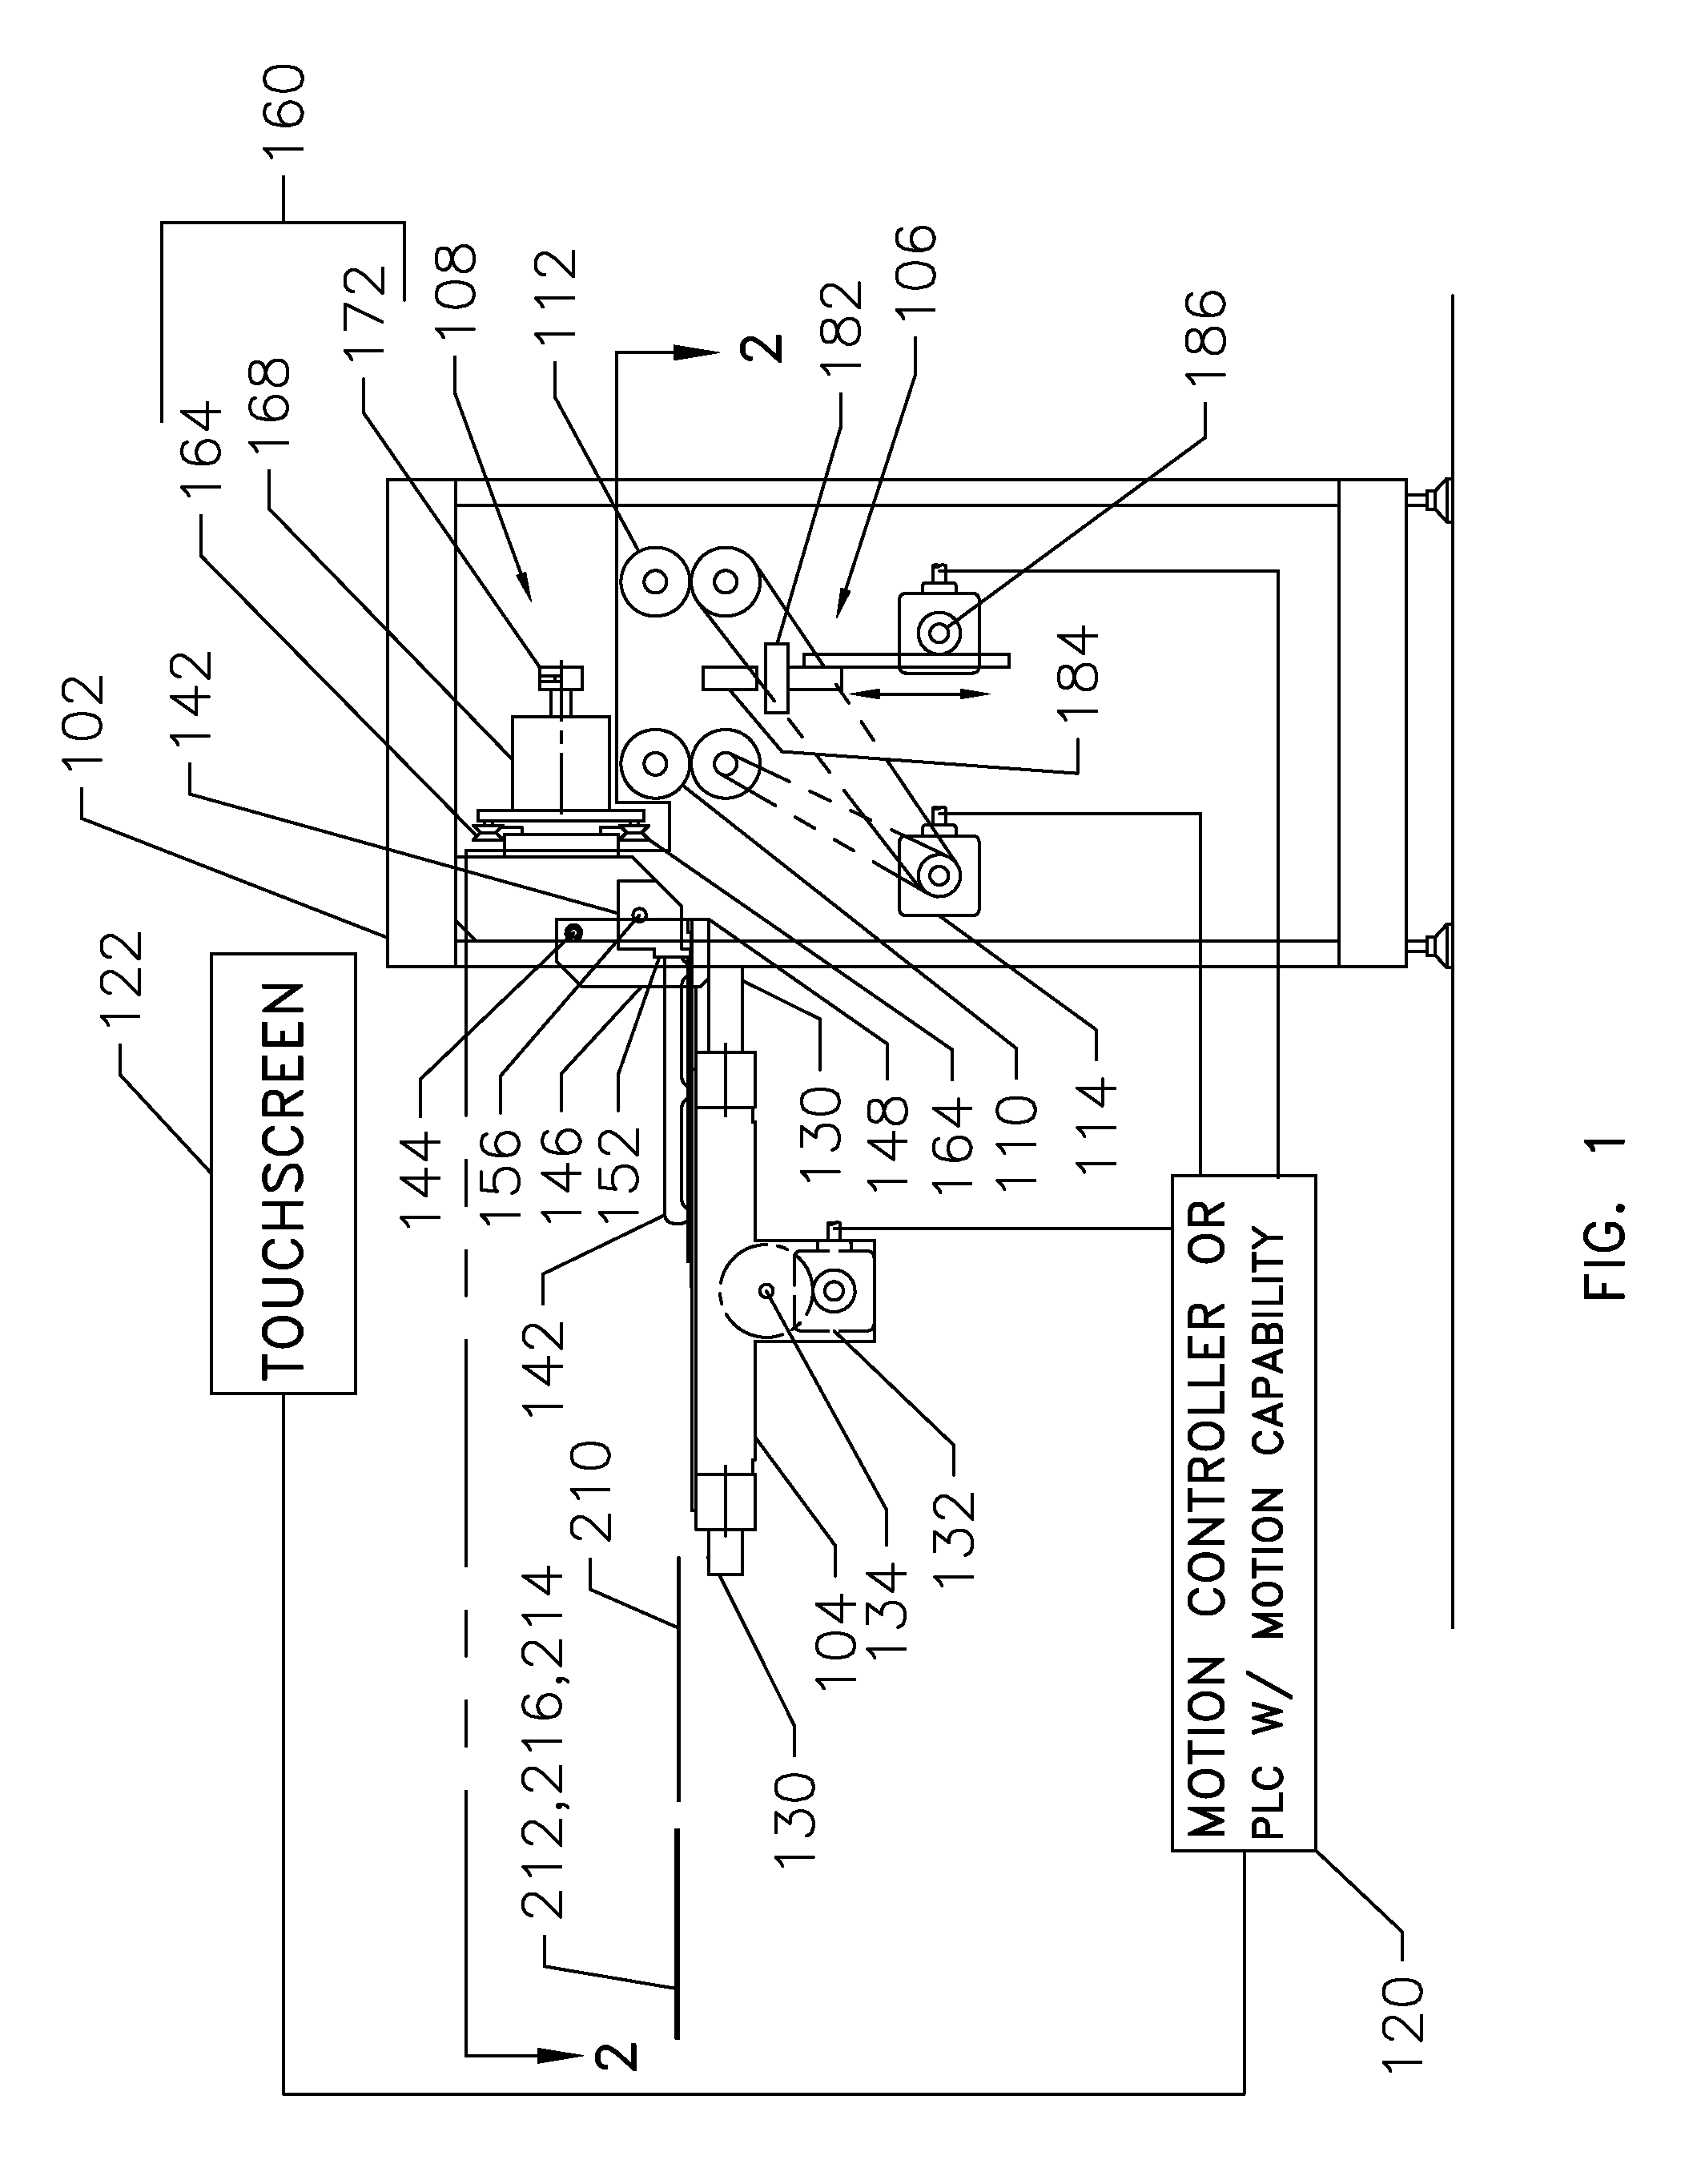 Single axis apparatus for manufacturing hard book cover